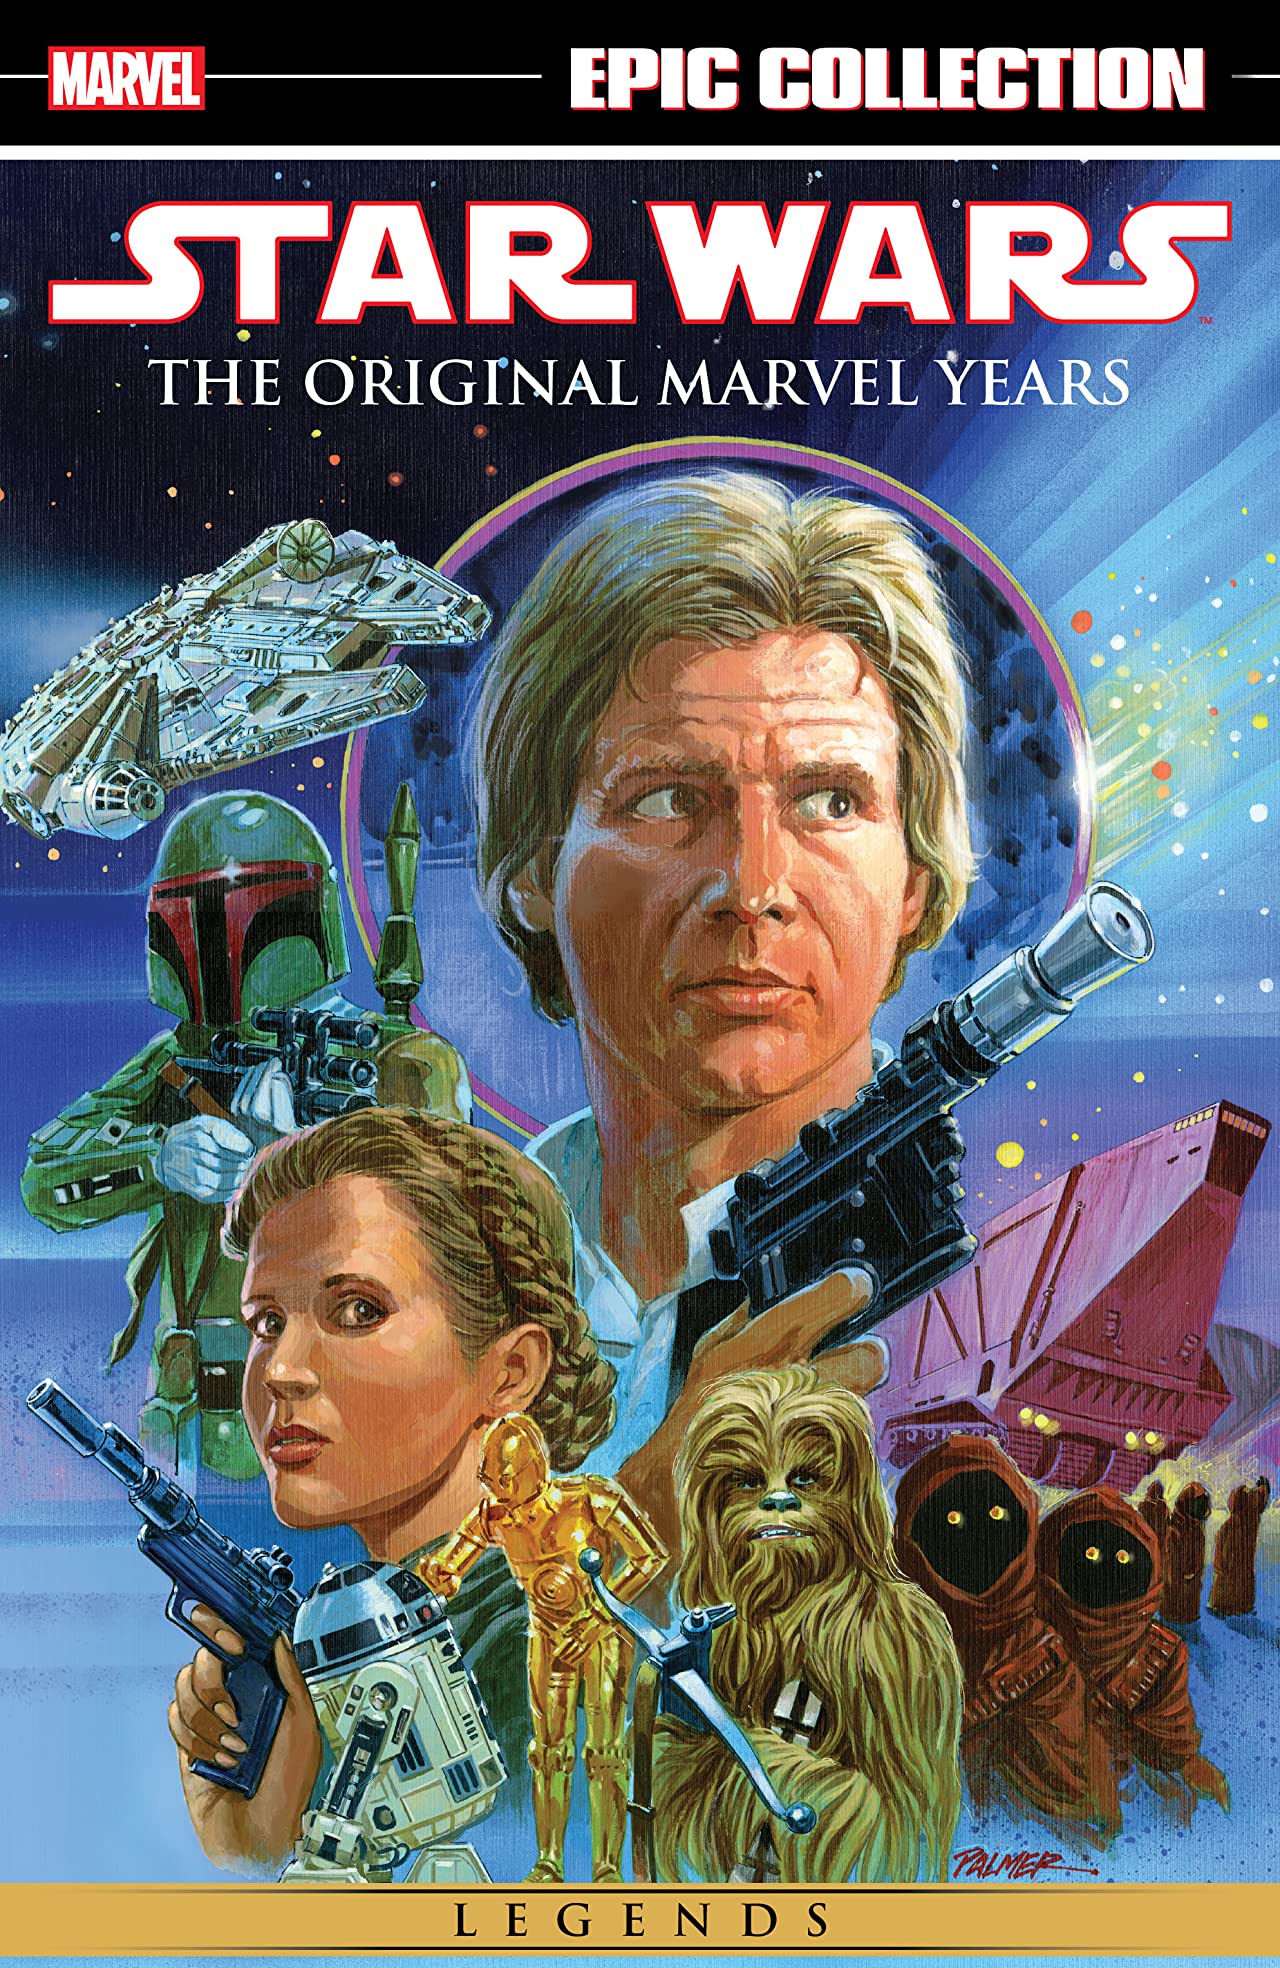 Star Wars Legends Epic Collection: The Original Marvel Years Vol. 5 (Trade Paperback)